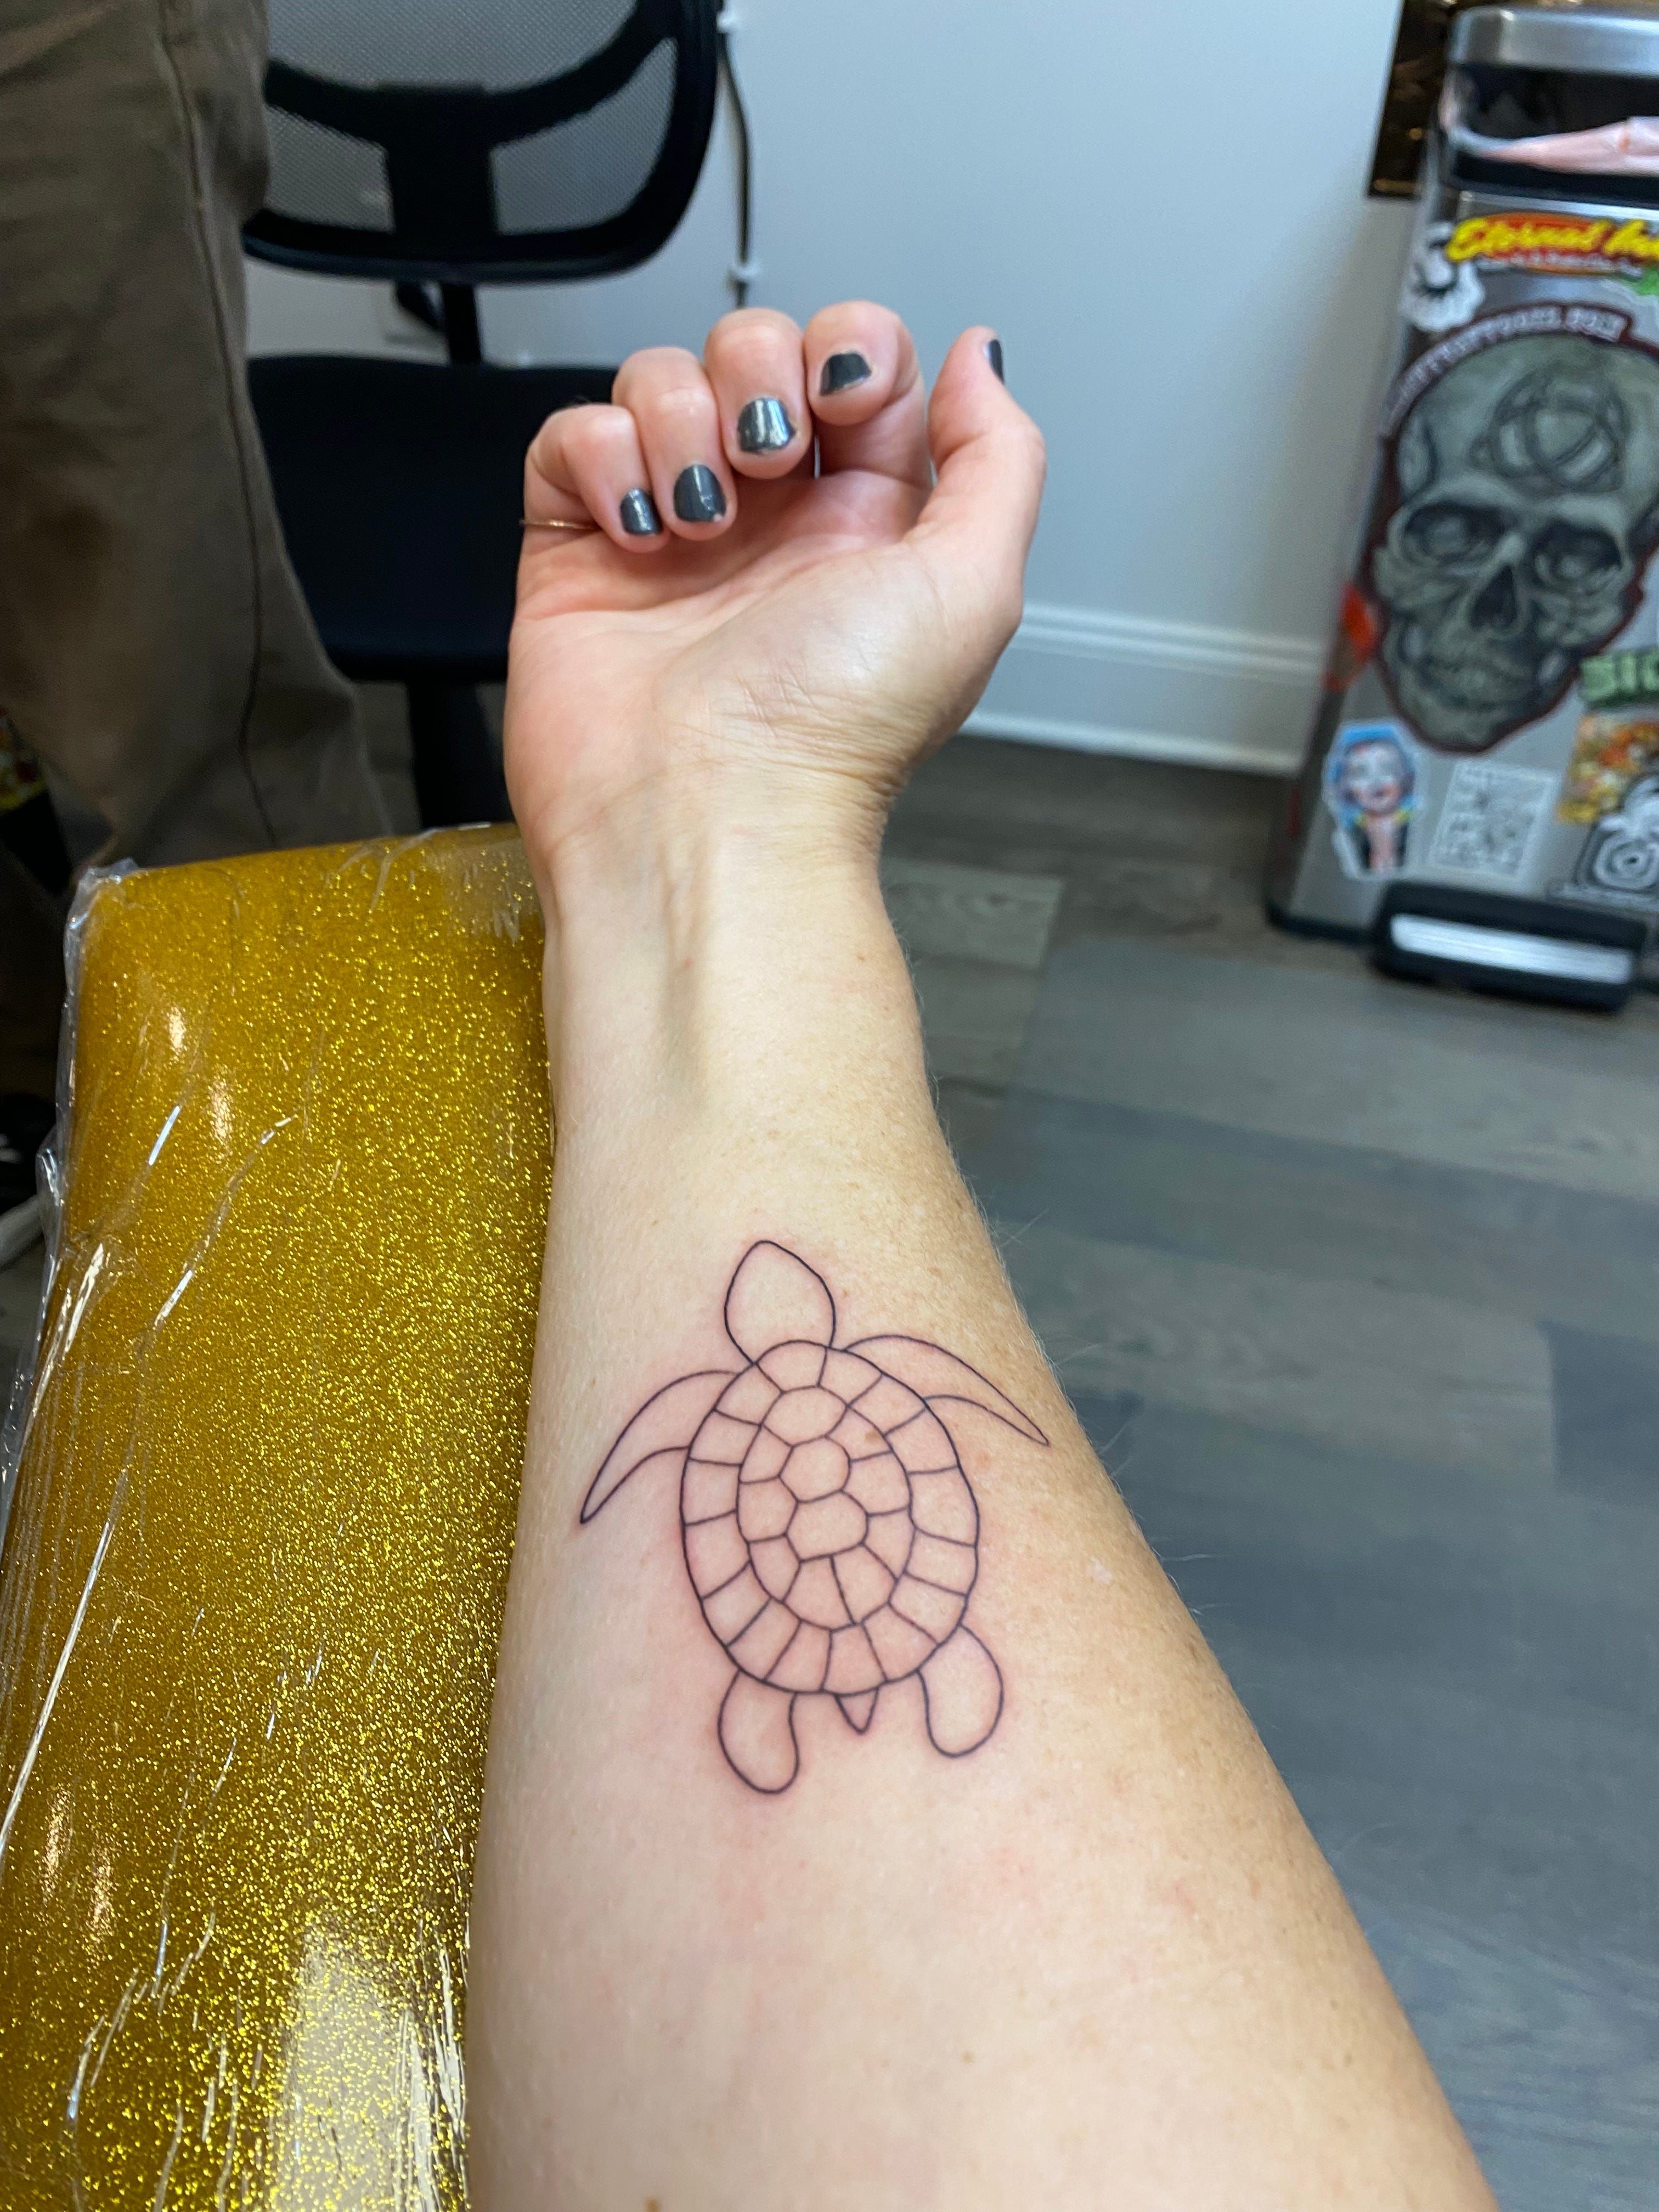 Turtle Tattoo  Sea turtles are the live representatives of a group of  reptiles that have existed on Earth and traveled our seas for the   Instagram